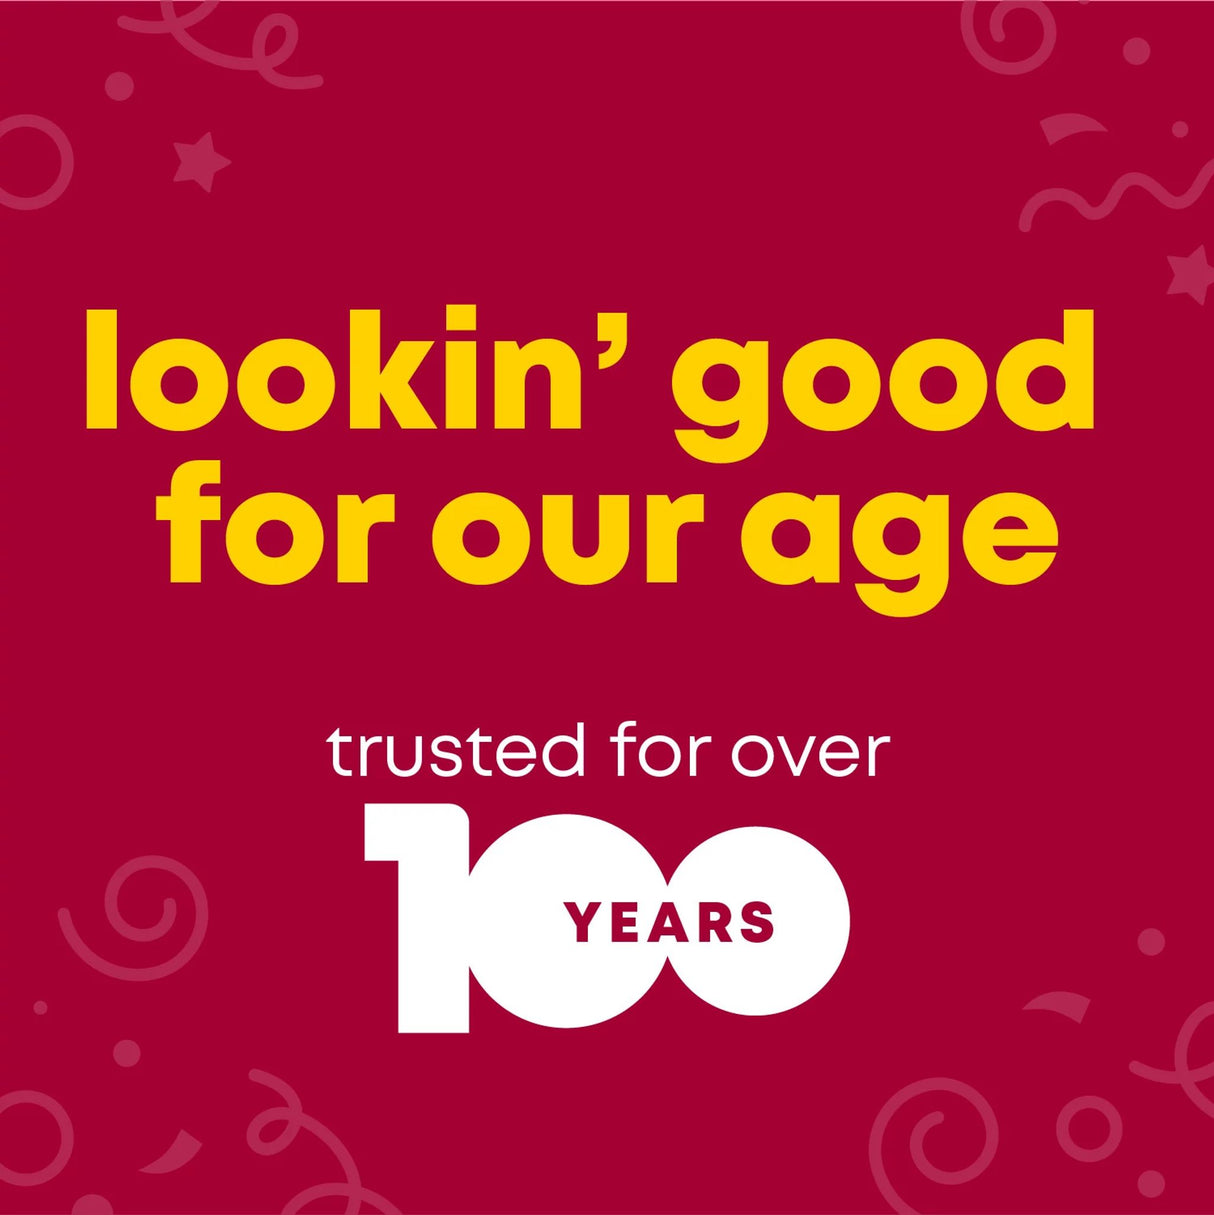  trusted for over 100 years